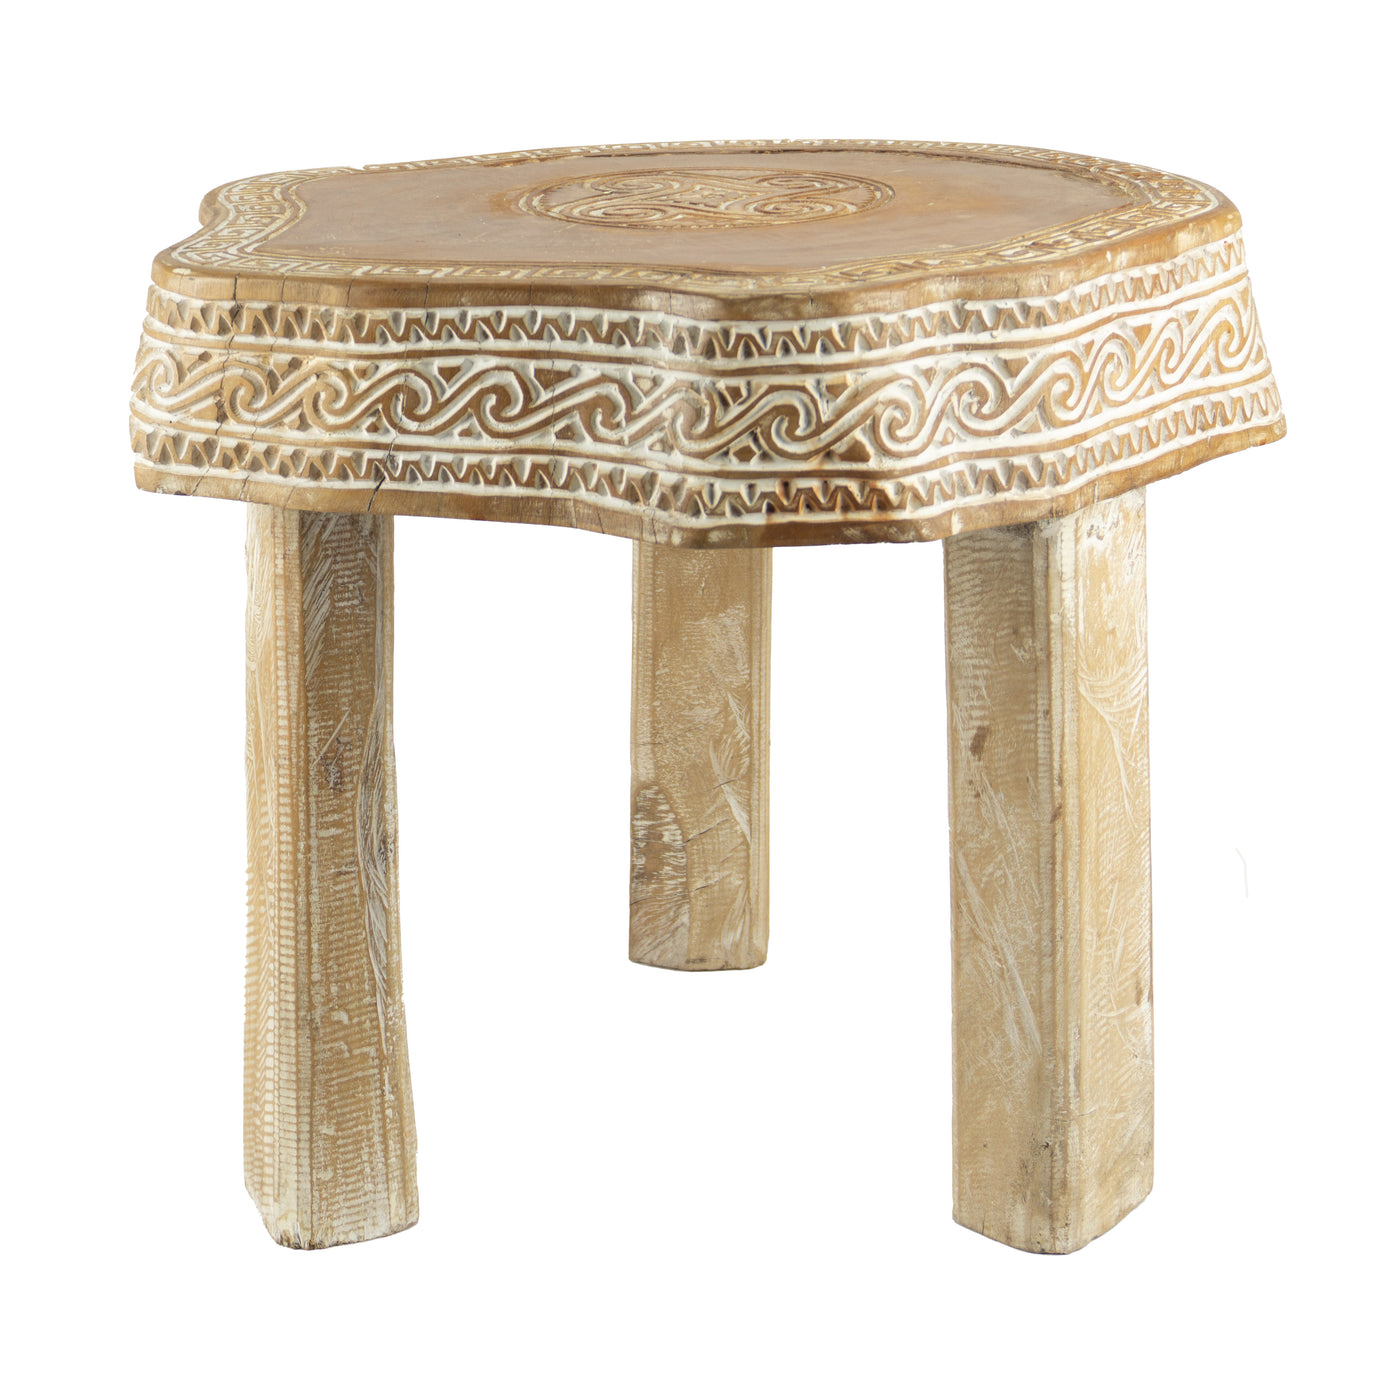 Acacia Wooden Table of Timor